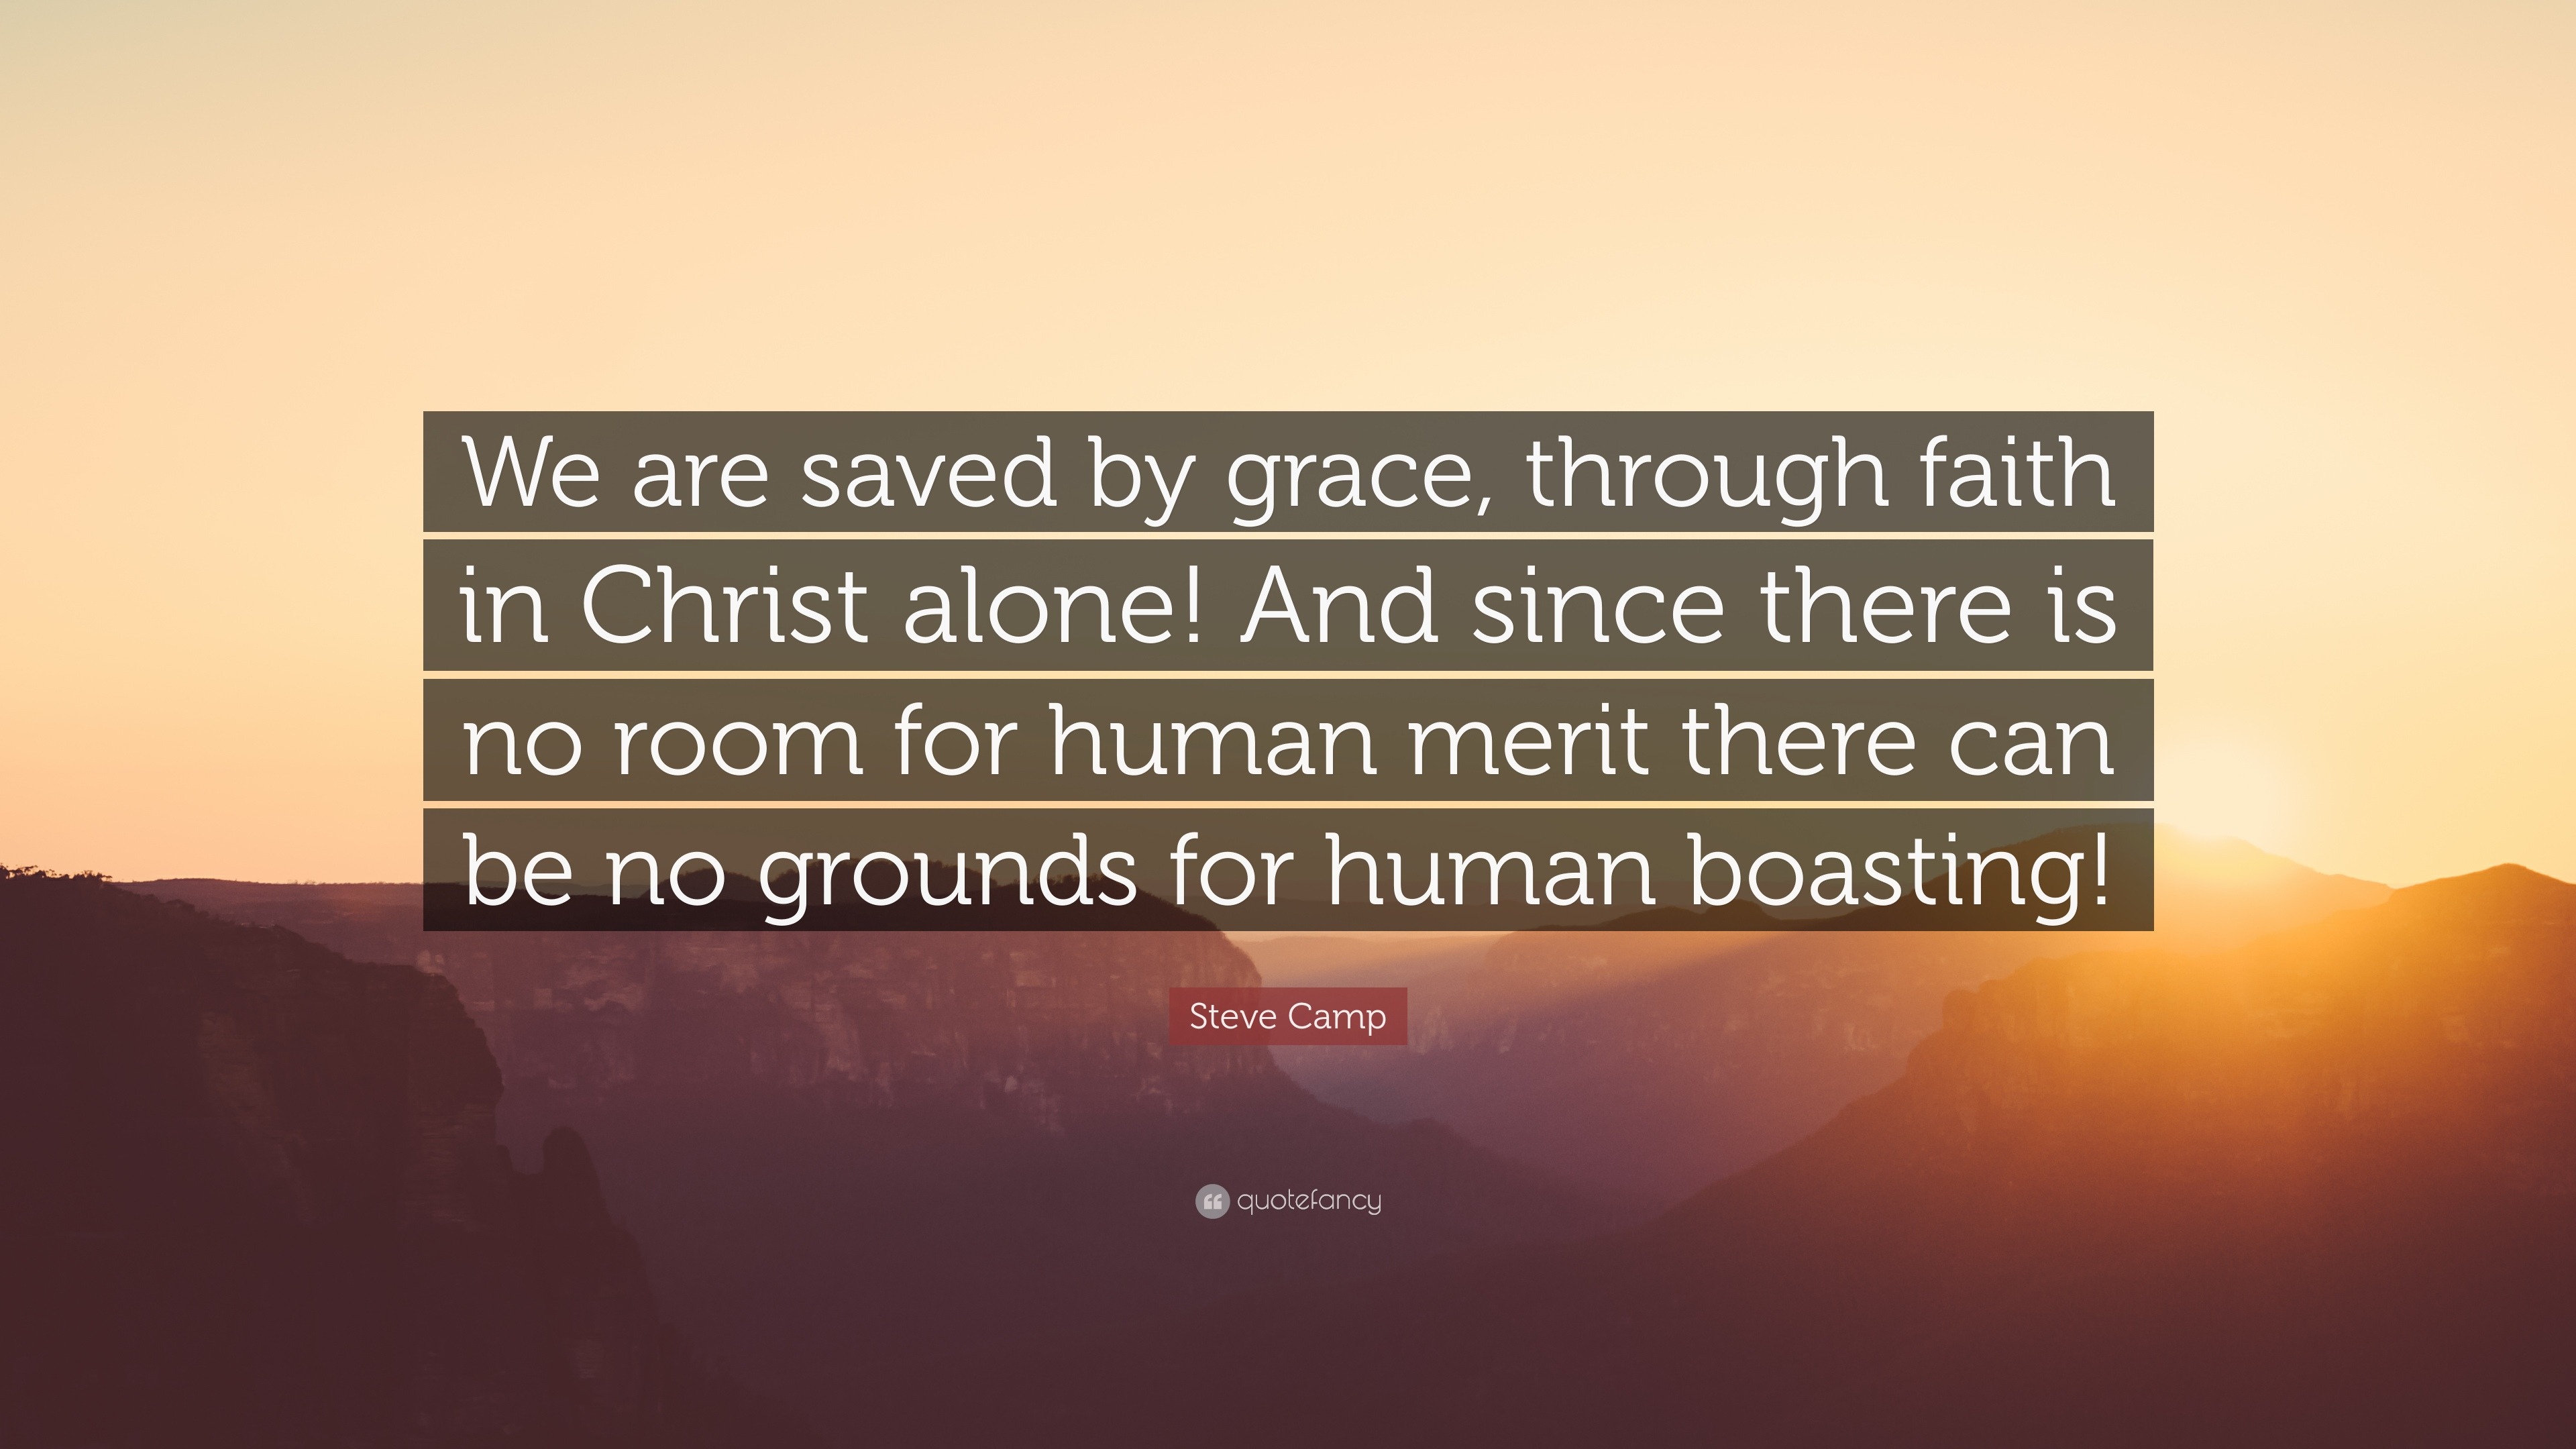 by grace alone through faith alone in christ alone